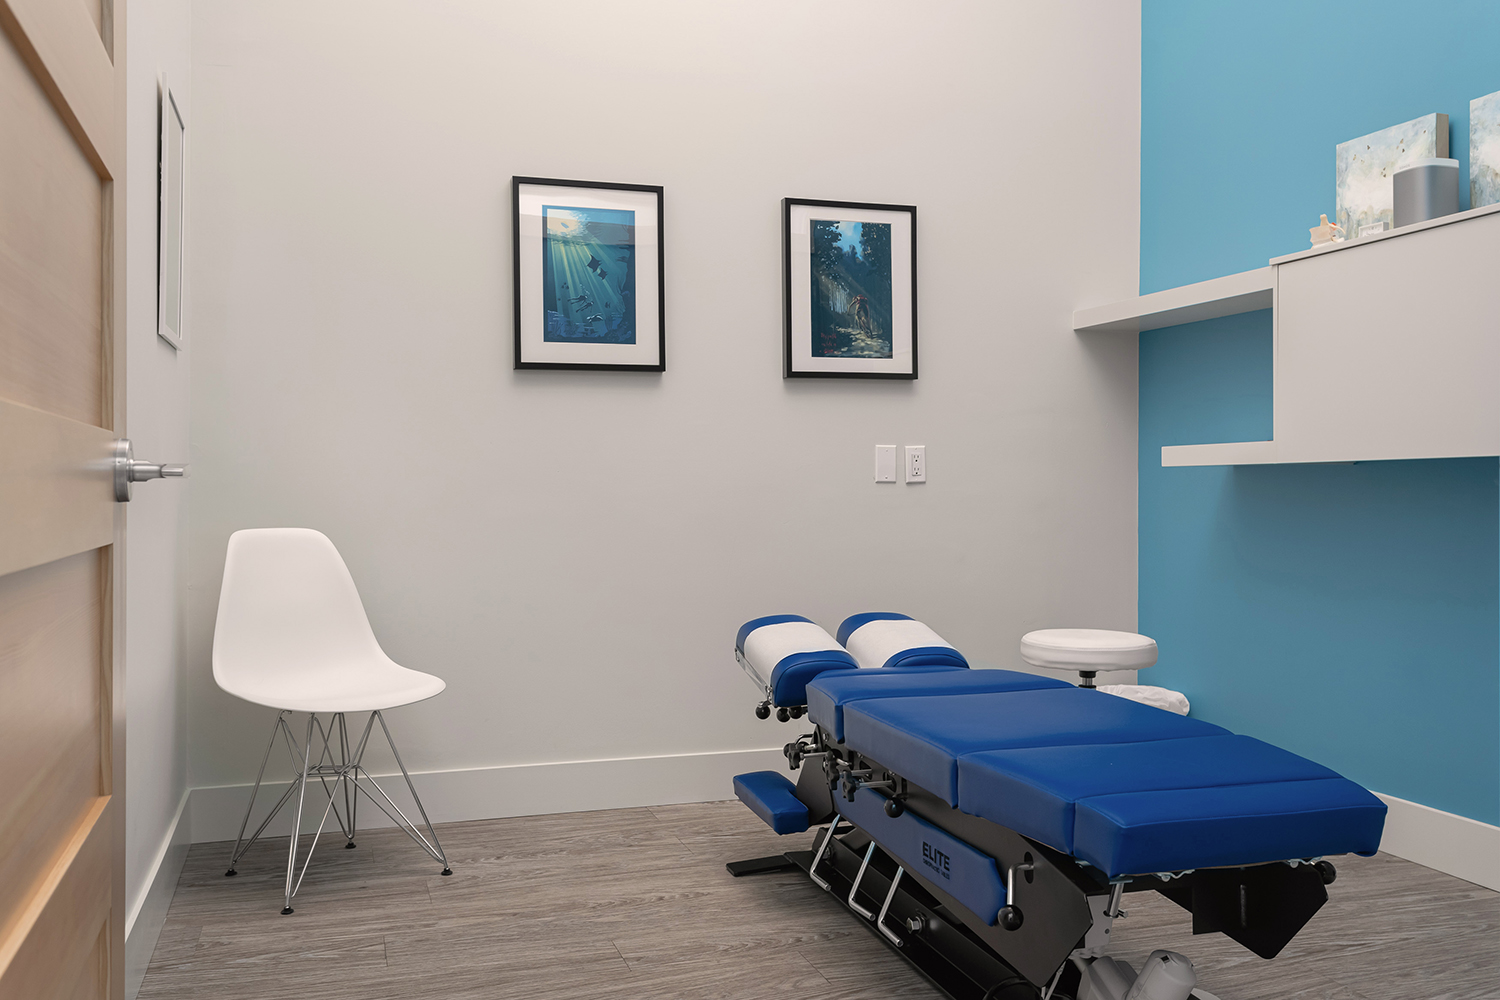 Chiropractic clinics are a complementary modality to traditional treatment. Their goal is to increase spinal mobility. This generally entails correcting different sections of the spine, such as the low, middle, and upper back, as well as the neck. Patients often select this sort of therapy when they are unhappy with traditional therapies or seek pain alleviation that conventional medicine can not provide.